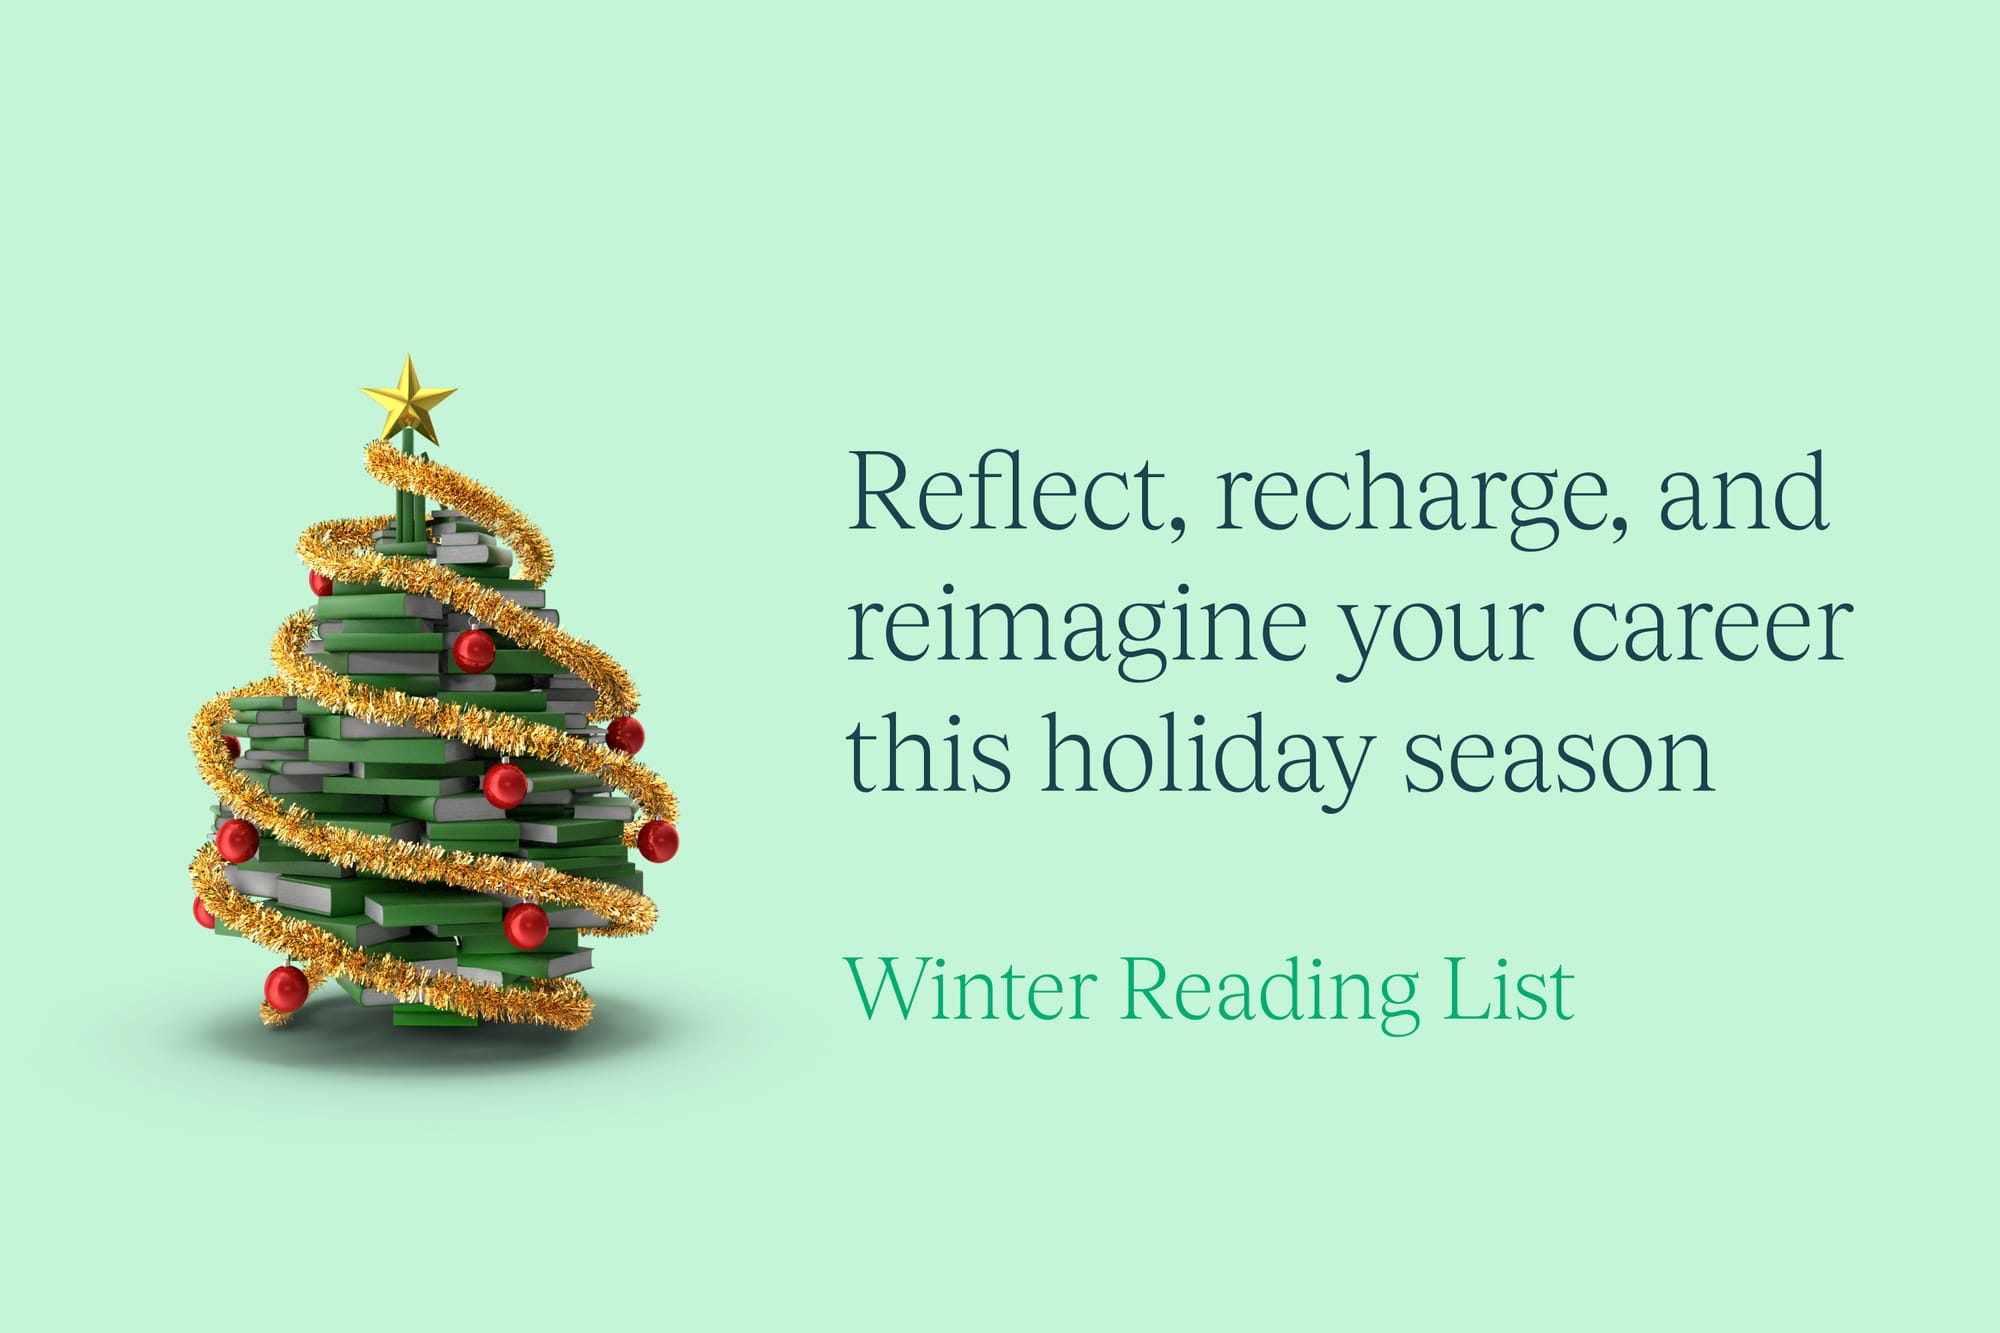 Reflect, recharge and reimagine your career this holiday season